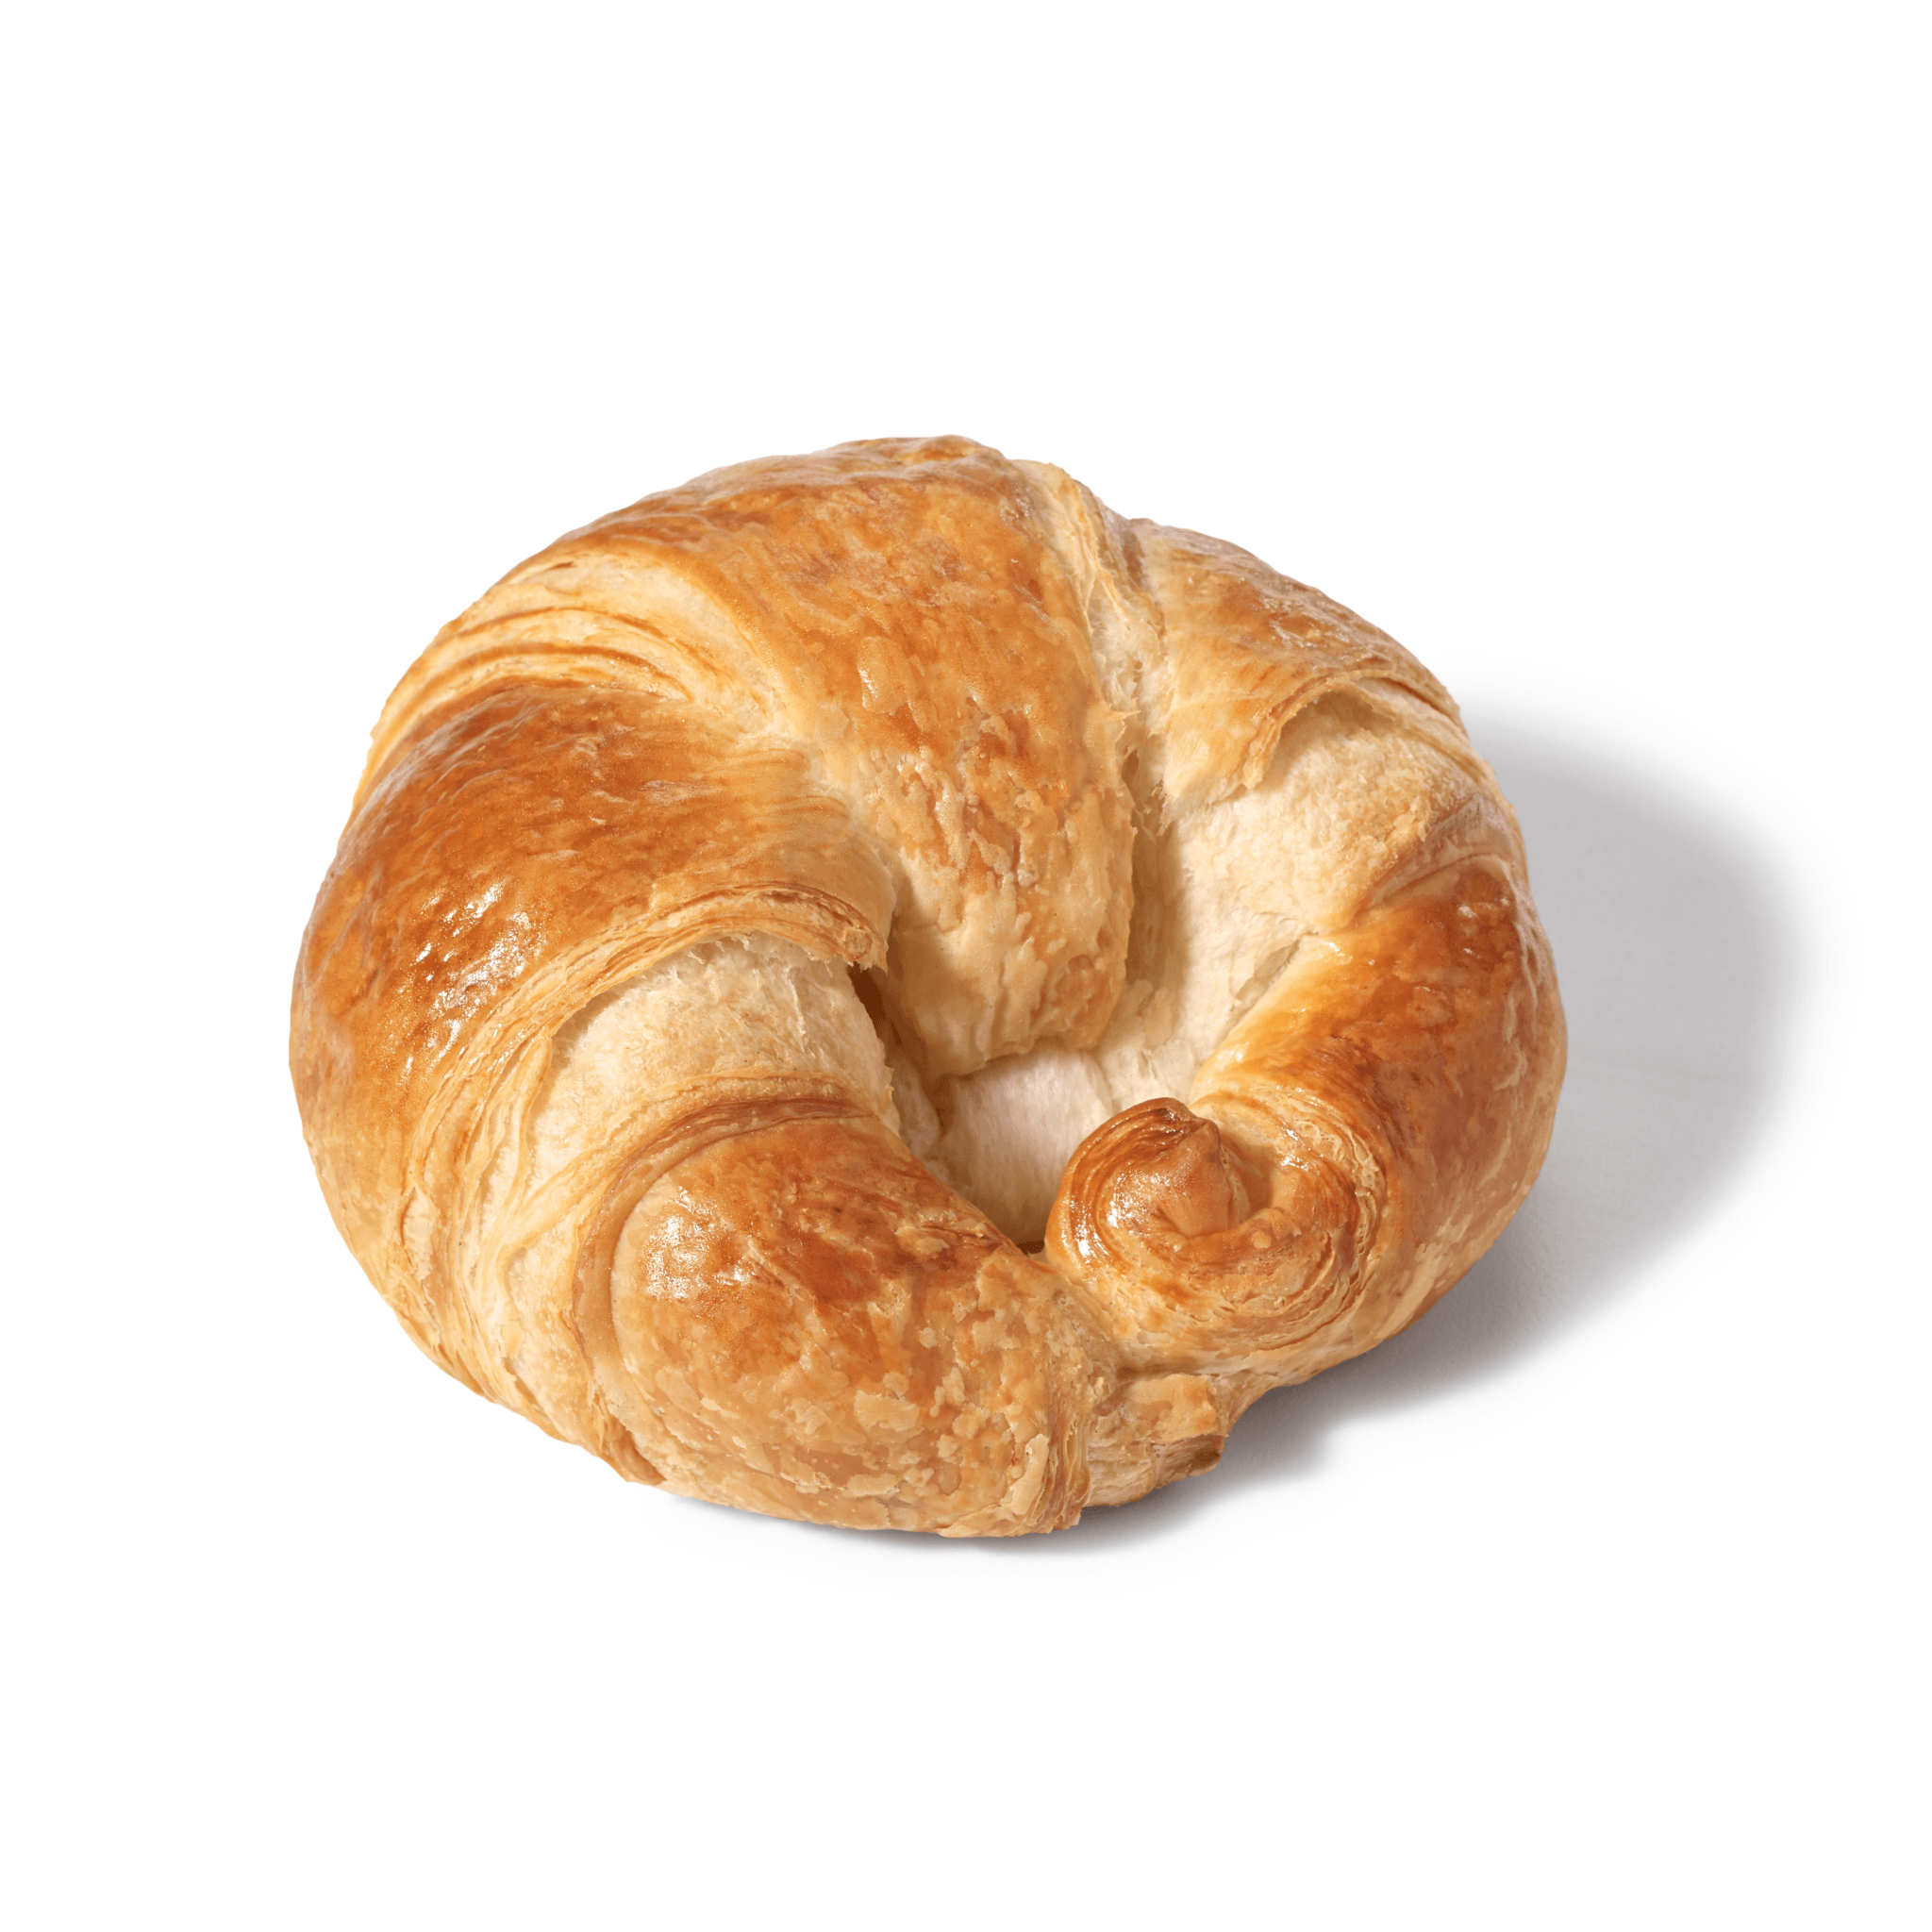 RCRL64 Curved croissant large angle